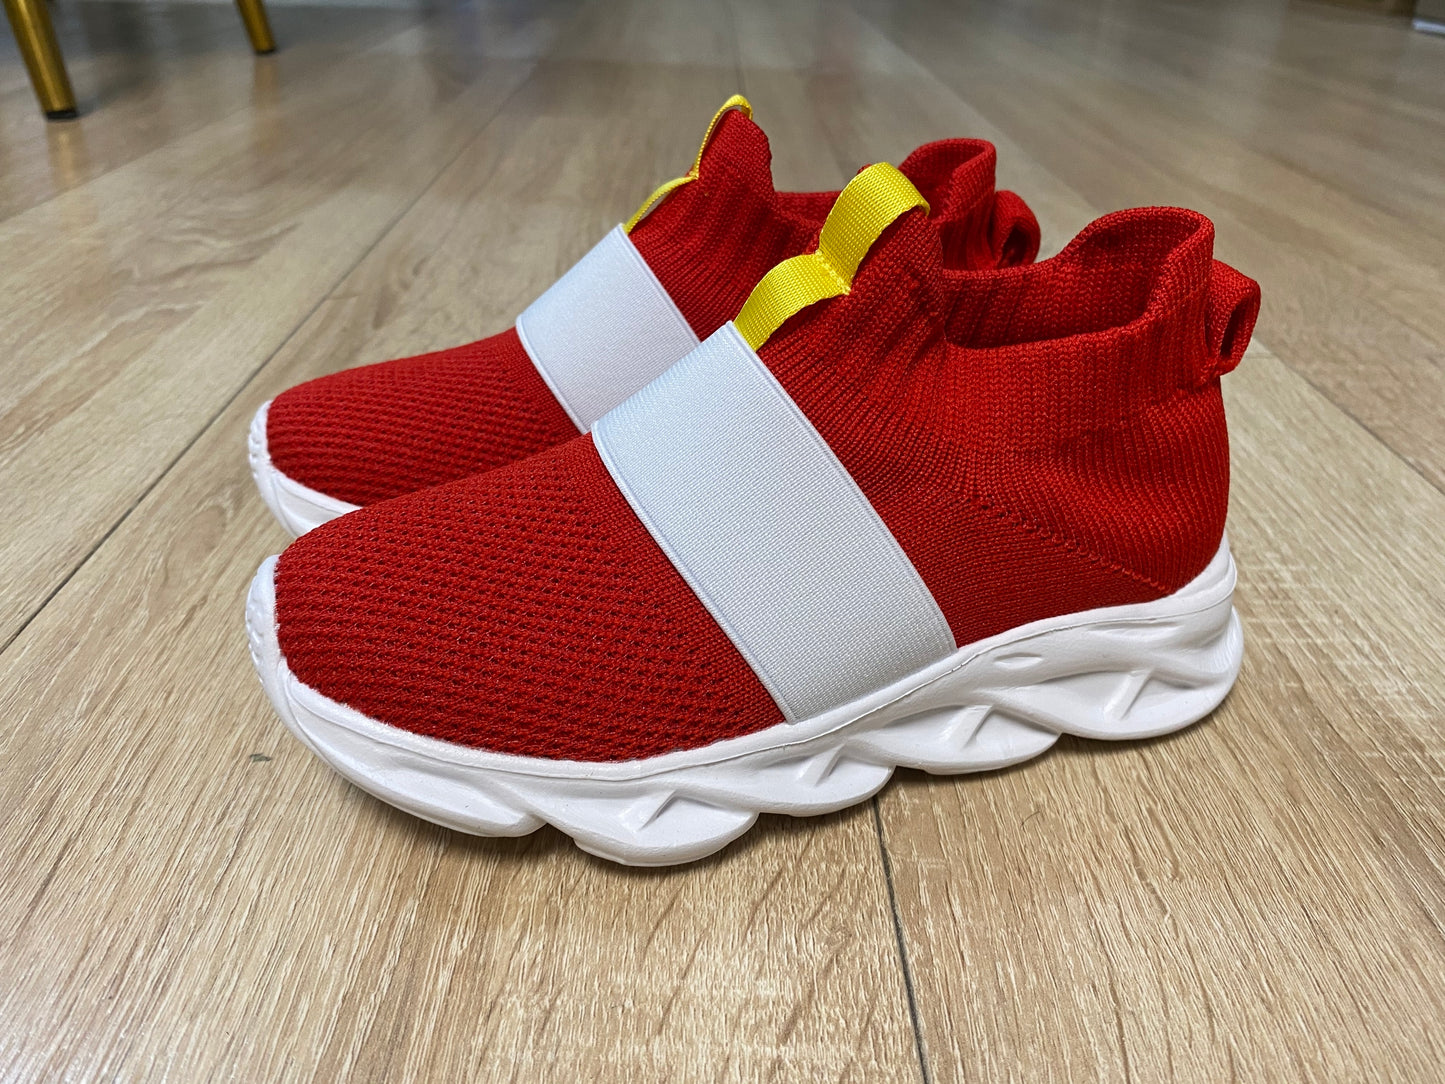 Sonic Shoes for Boys Girls Kids -Style 2